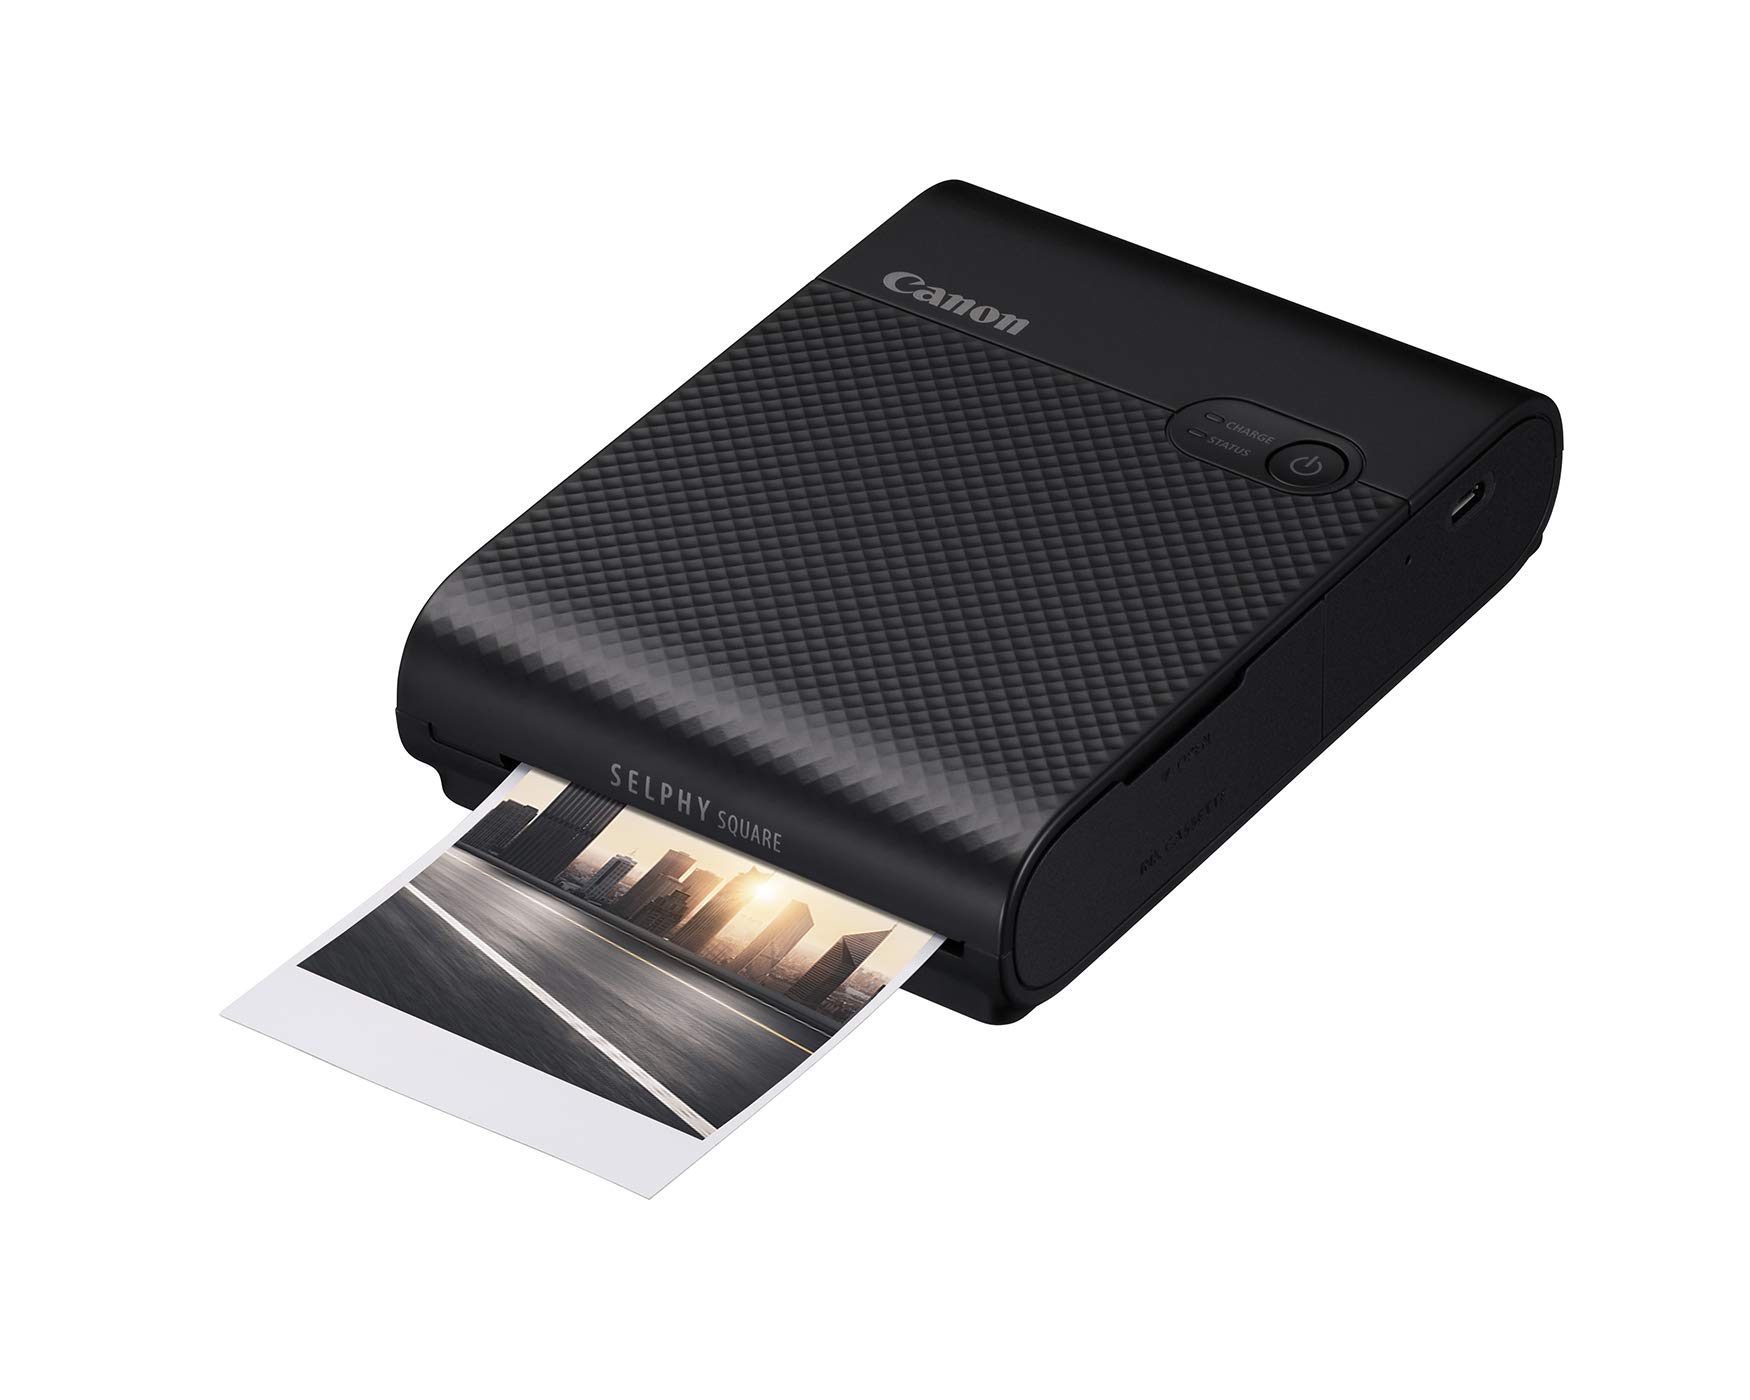 Canon SELPHY QX10 Portable Square Photo Printer for iPhone or Android $99 (norm $149) $99.99